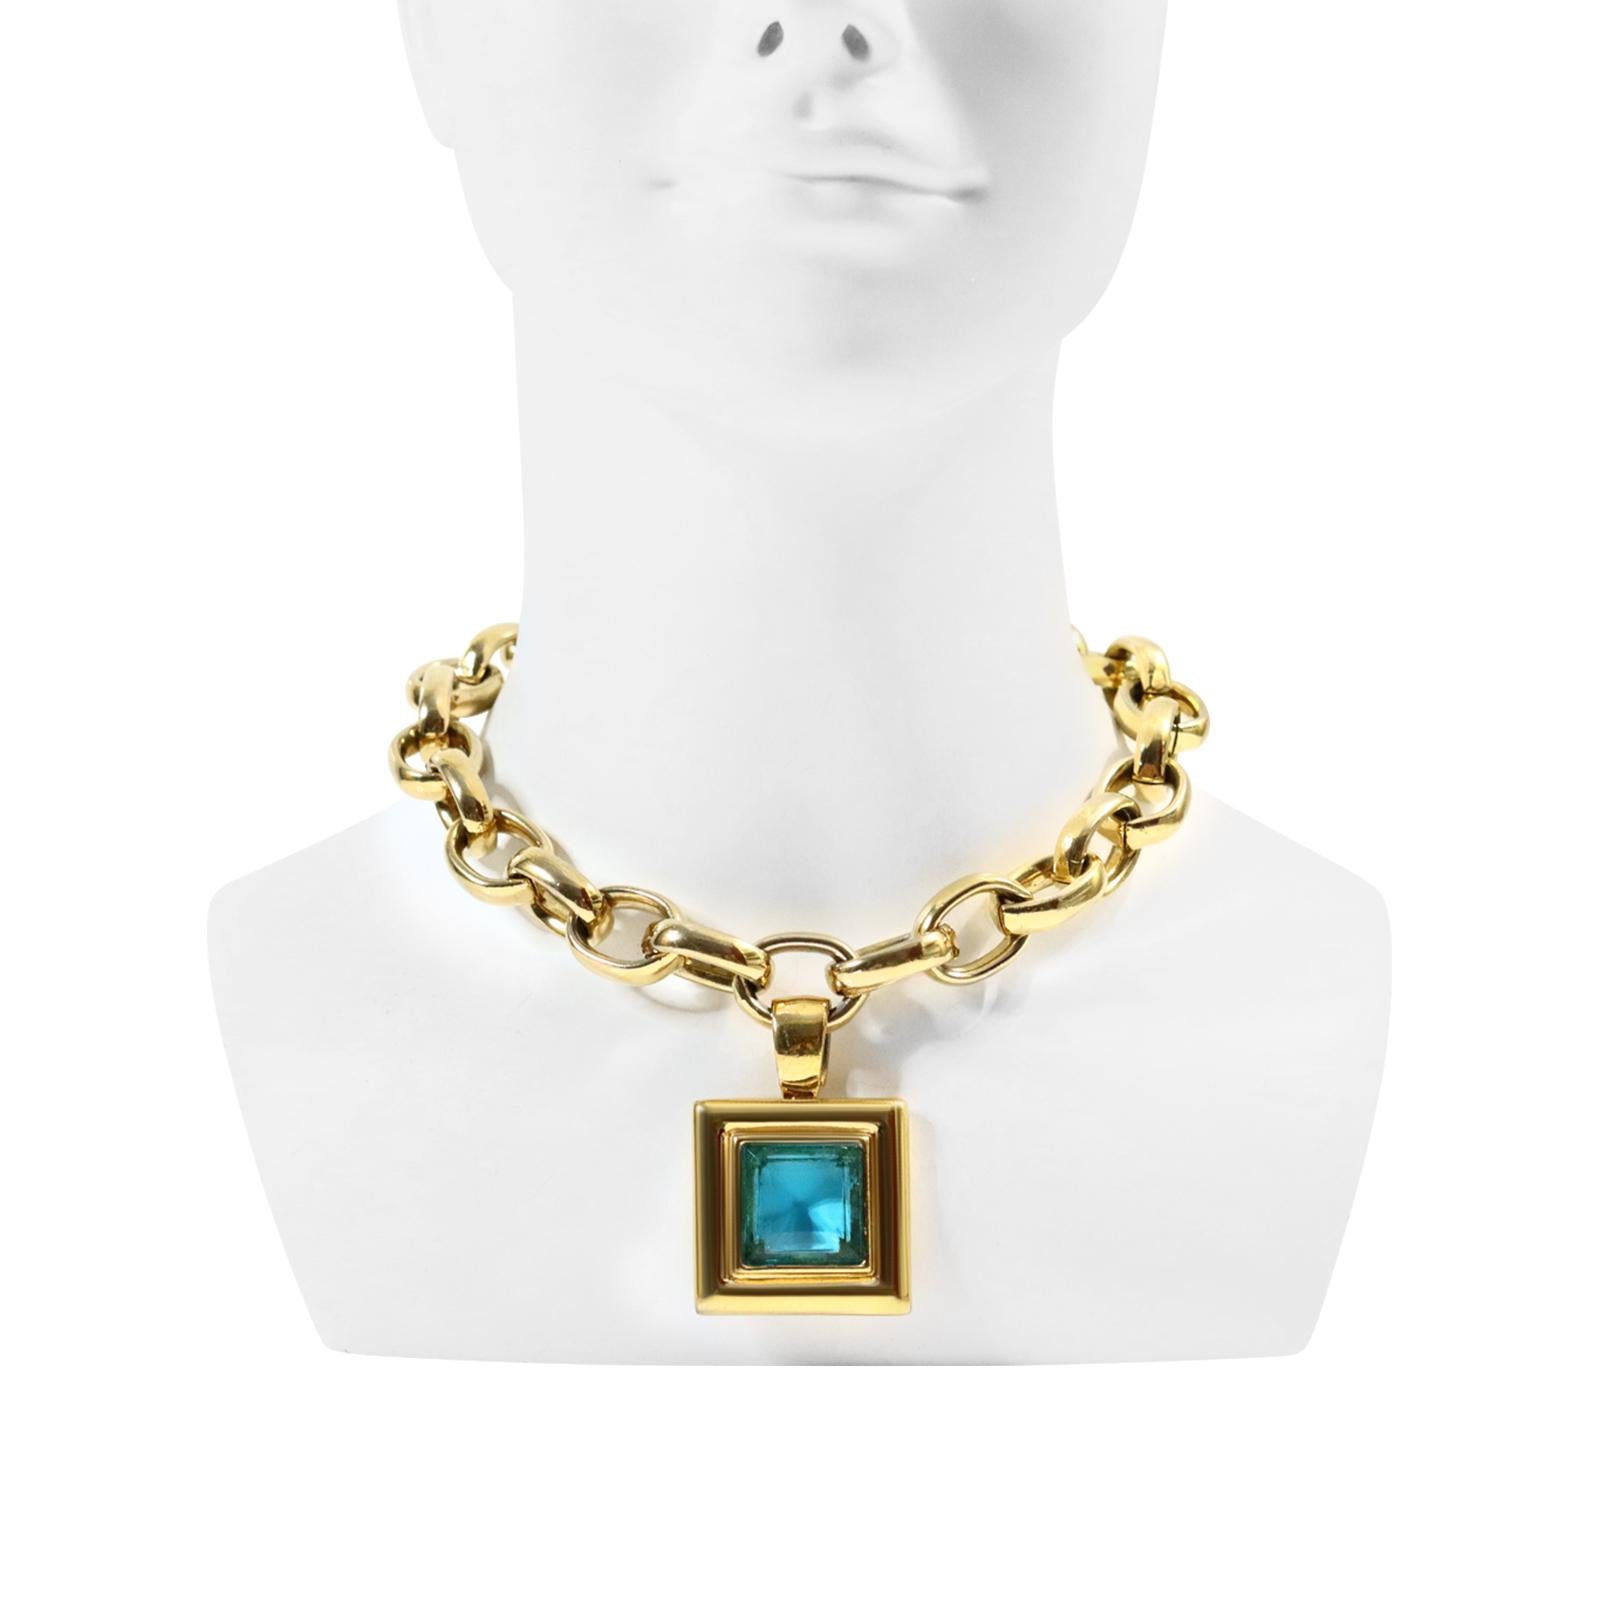 Vintage Givenchy Gold Tone Heavy Link Chain with Dangling Blue Drop Necklace. A classic look from Givenchy.  Heavy square blue, clear faceted piece hangs from large oval links. A lot of appeal here. 16